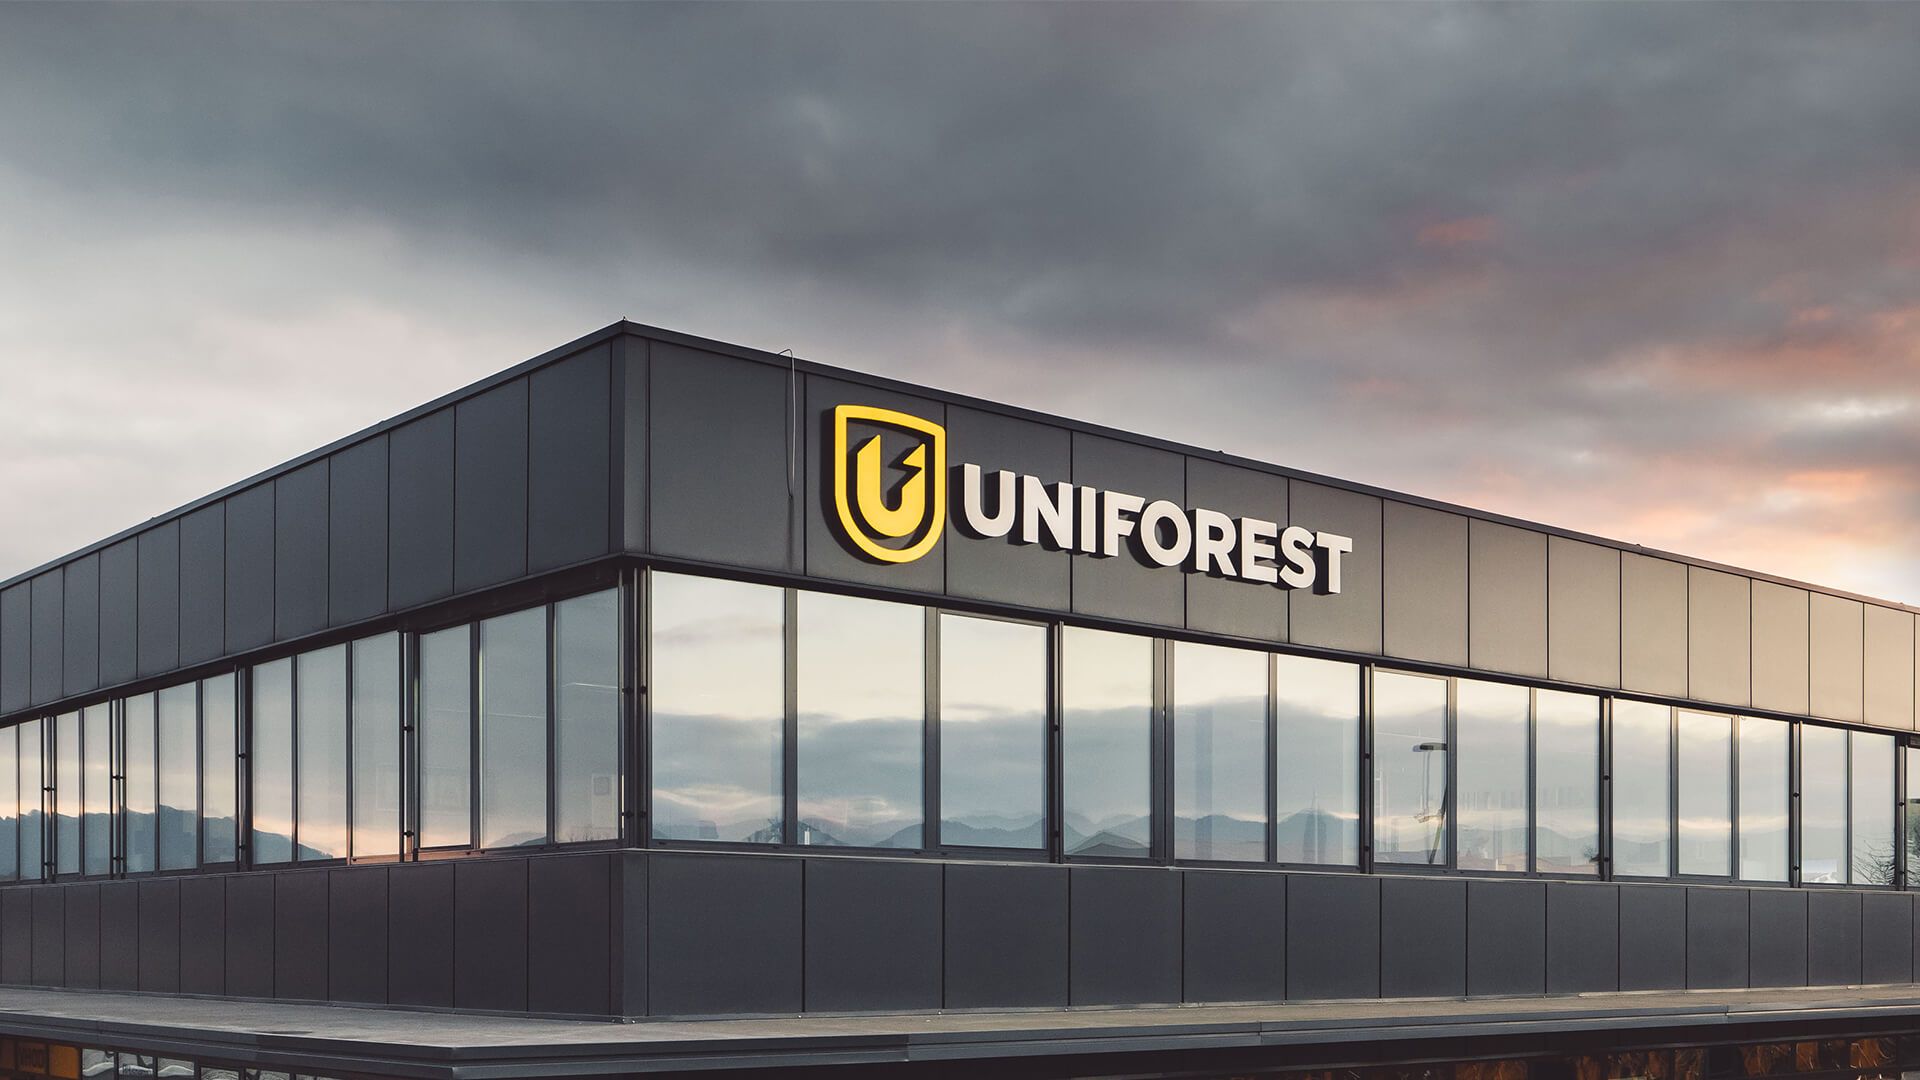 Uniforest Company and Brand